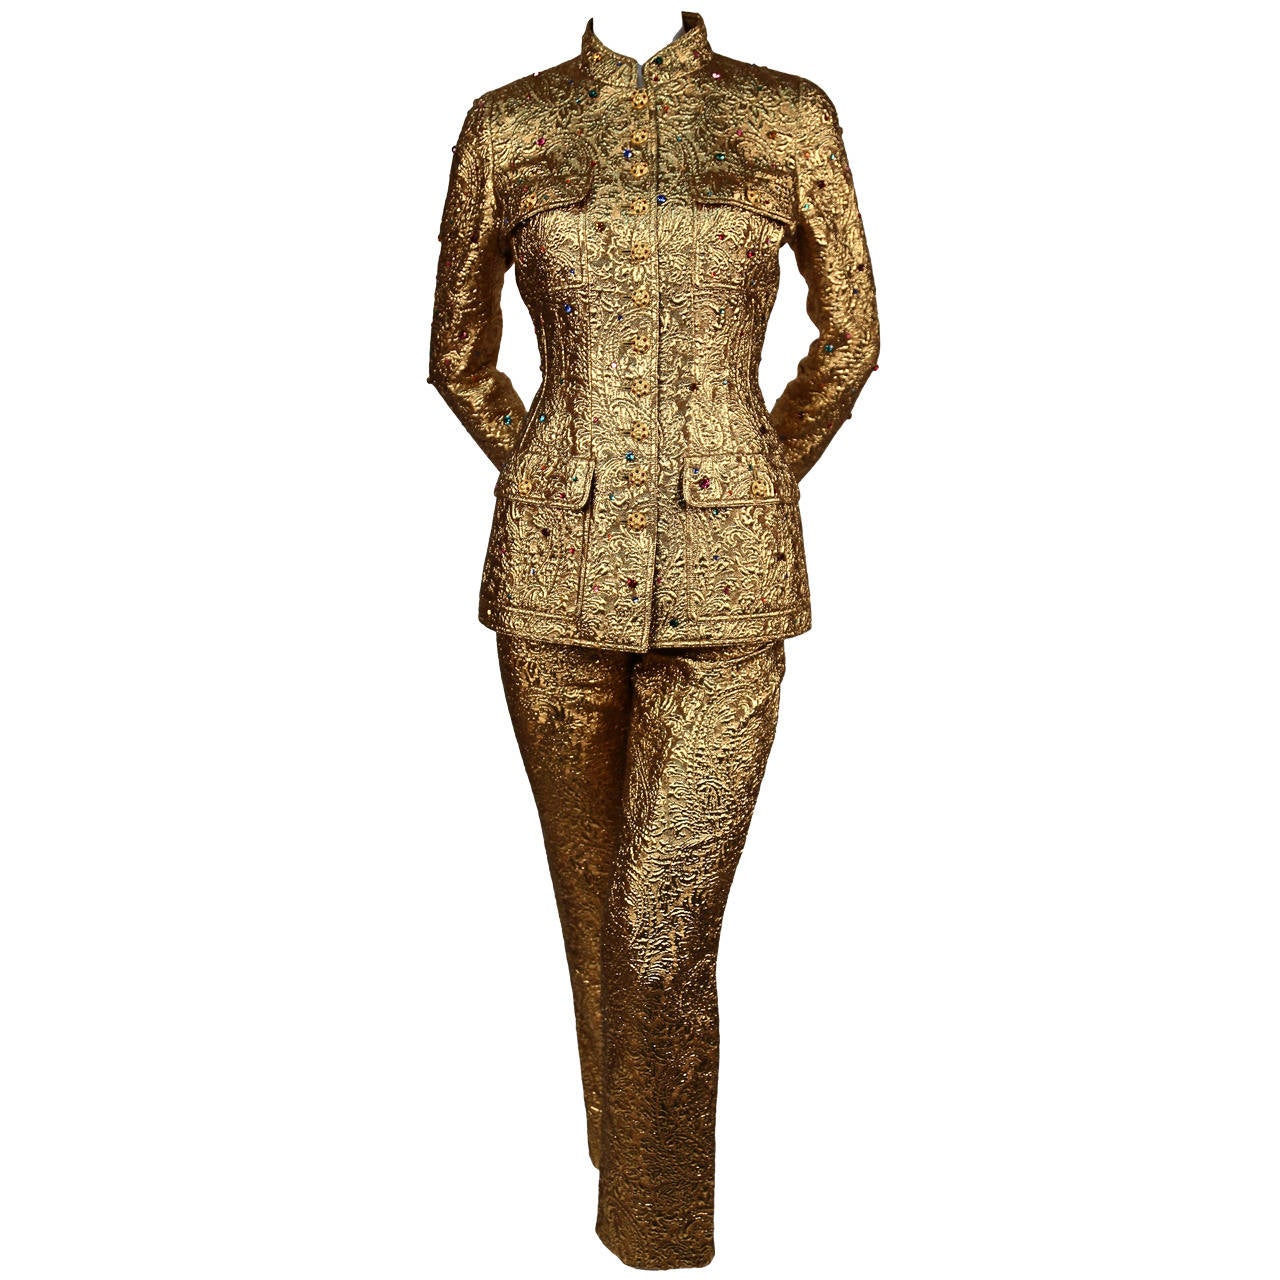 Chanel Dress 1996 - 10 For Sale on 1stDibs  chanel haute couture 1996 gold  embroidered dress price